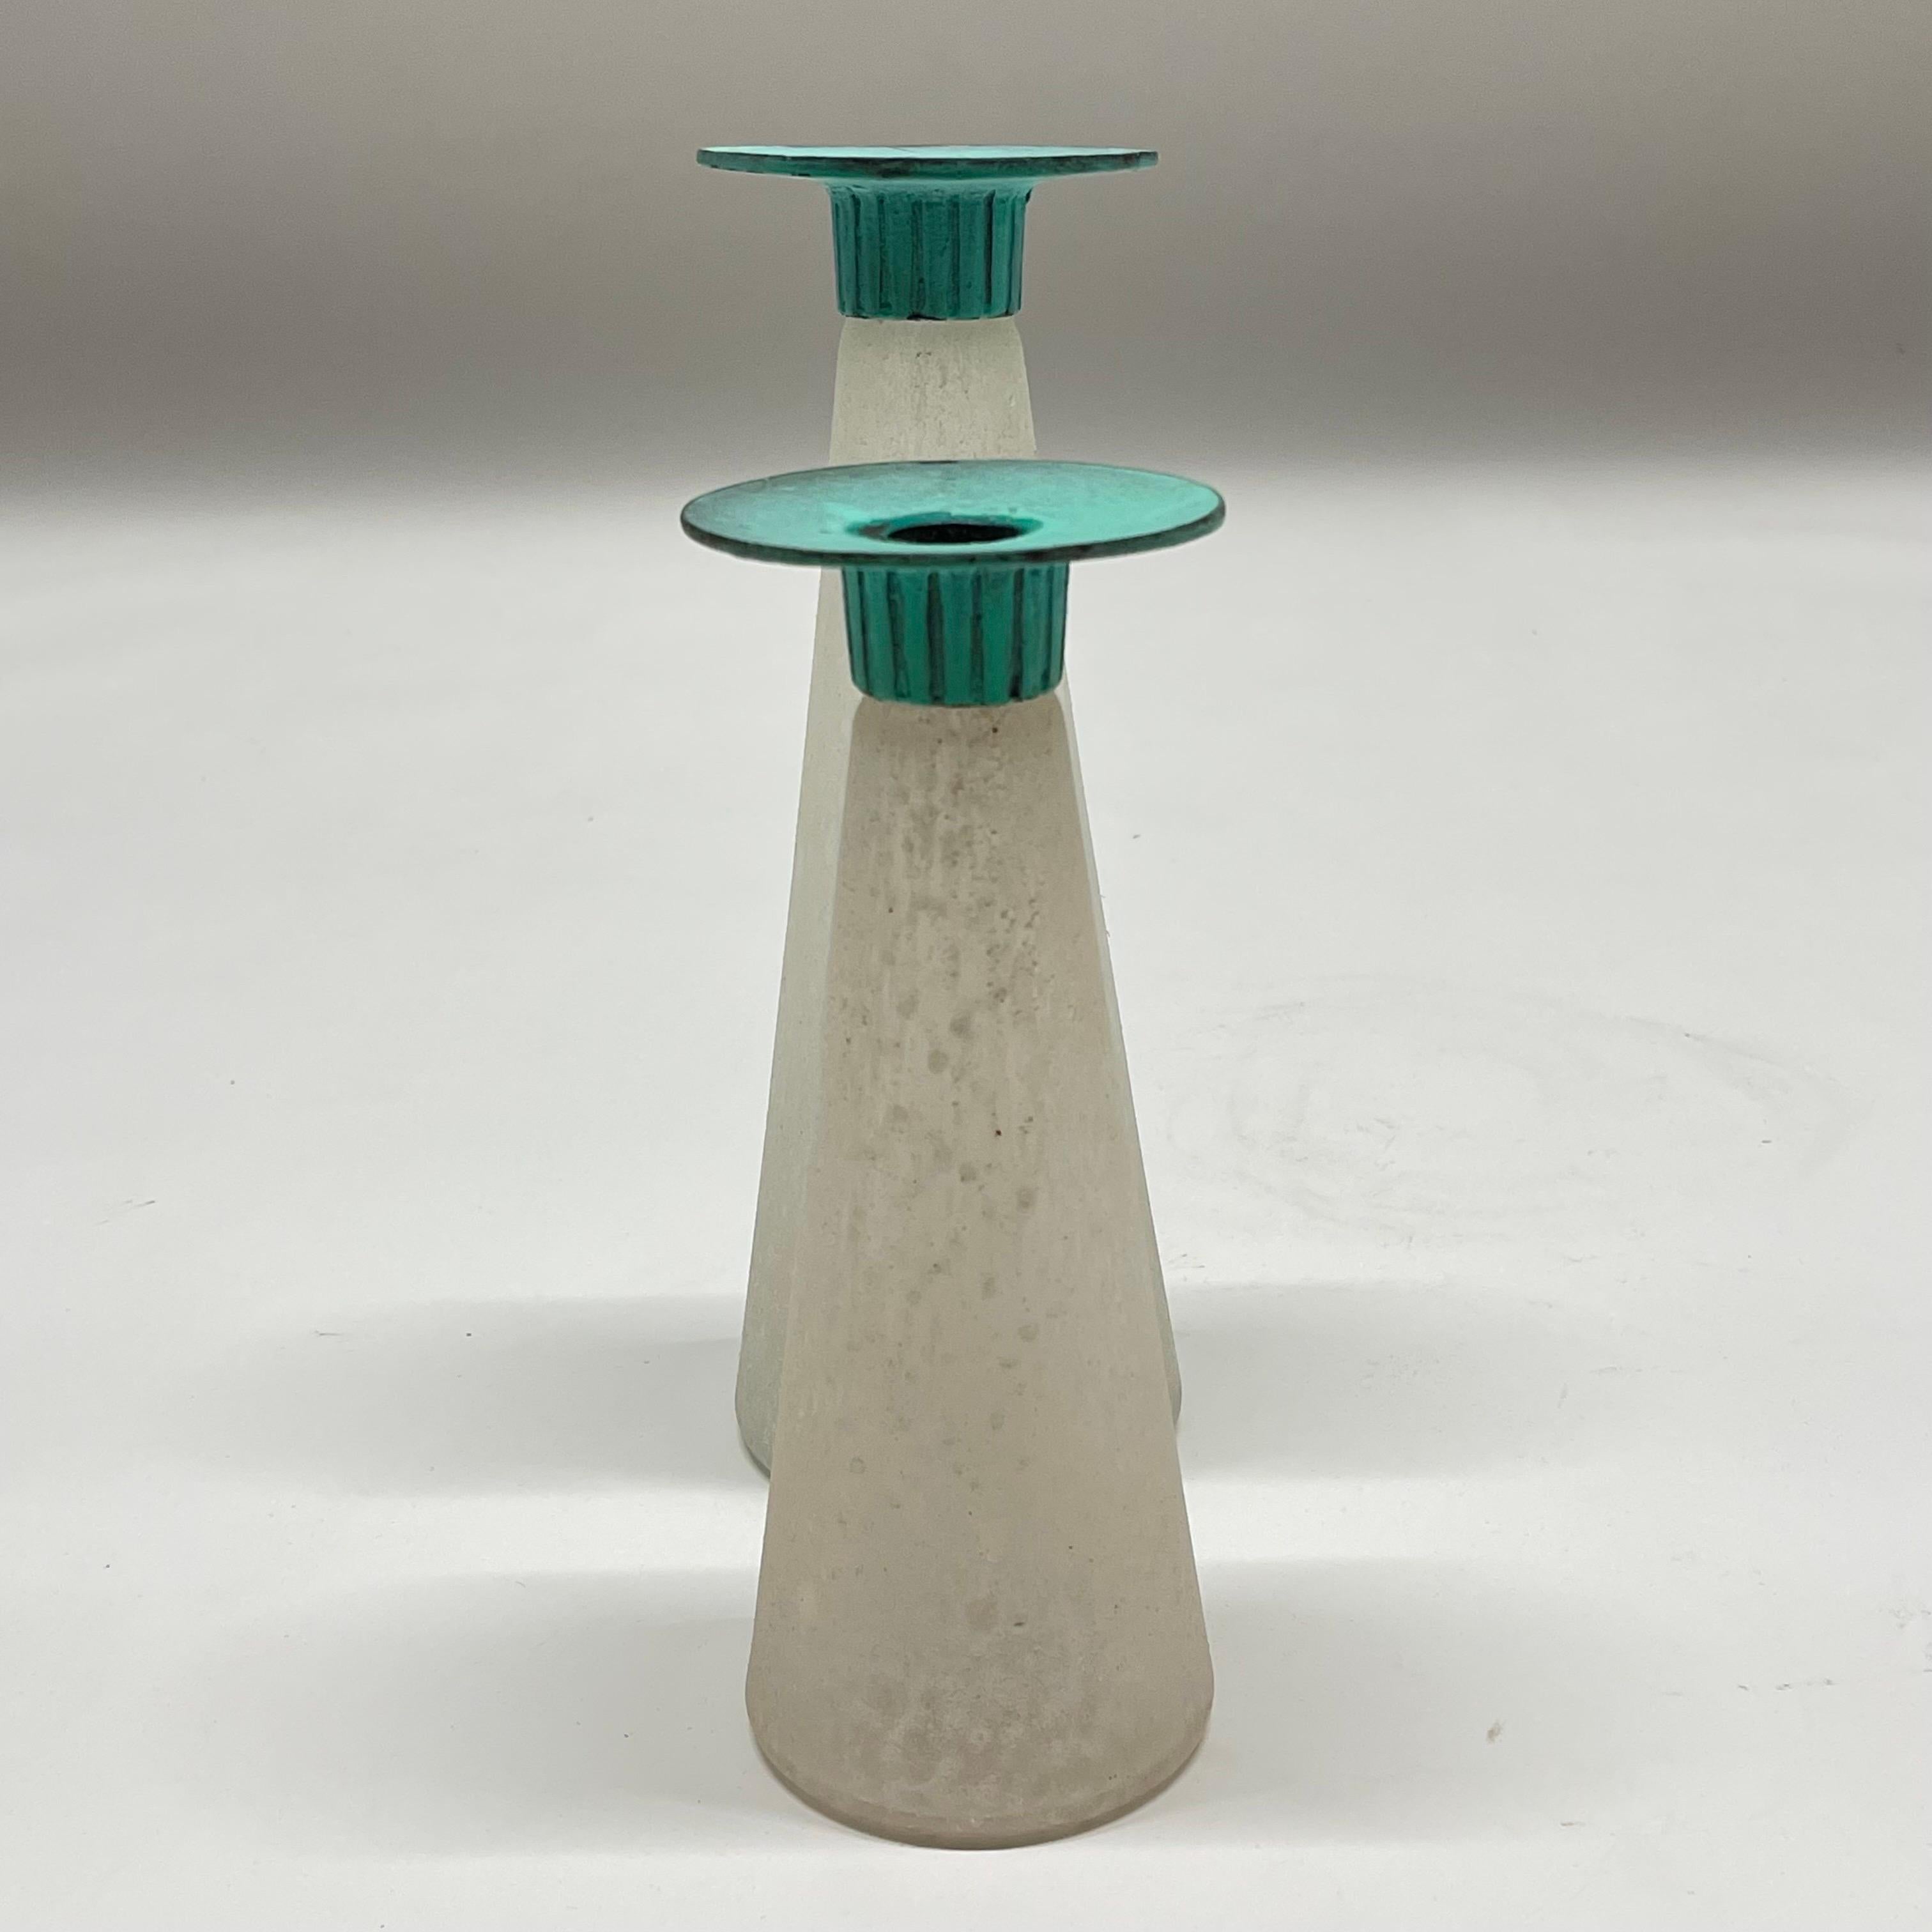 Post Modern pair of asymmetrical candlesticks or candle holders, rendered in scavo corroso glass conical bases with verdigris patinated bronze candle cups, by Toyo, made in Taiwan, circa 1980s.